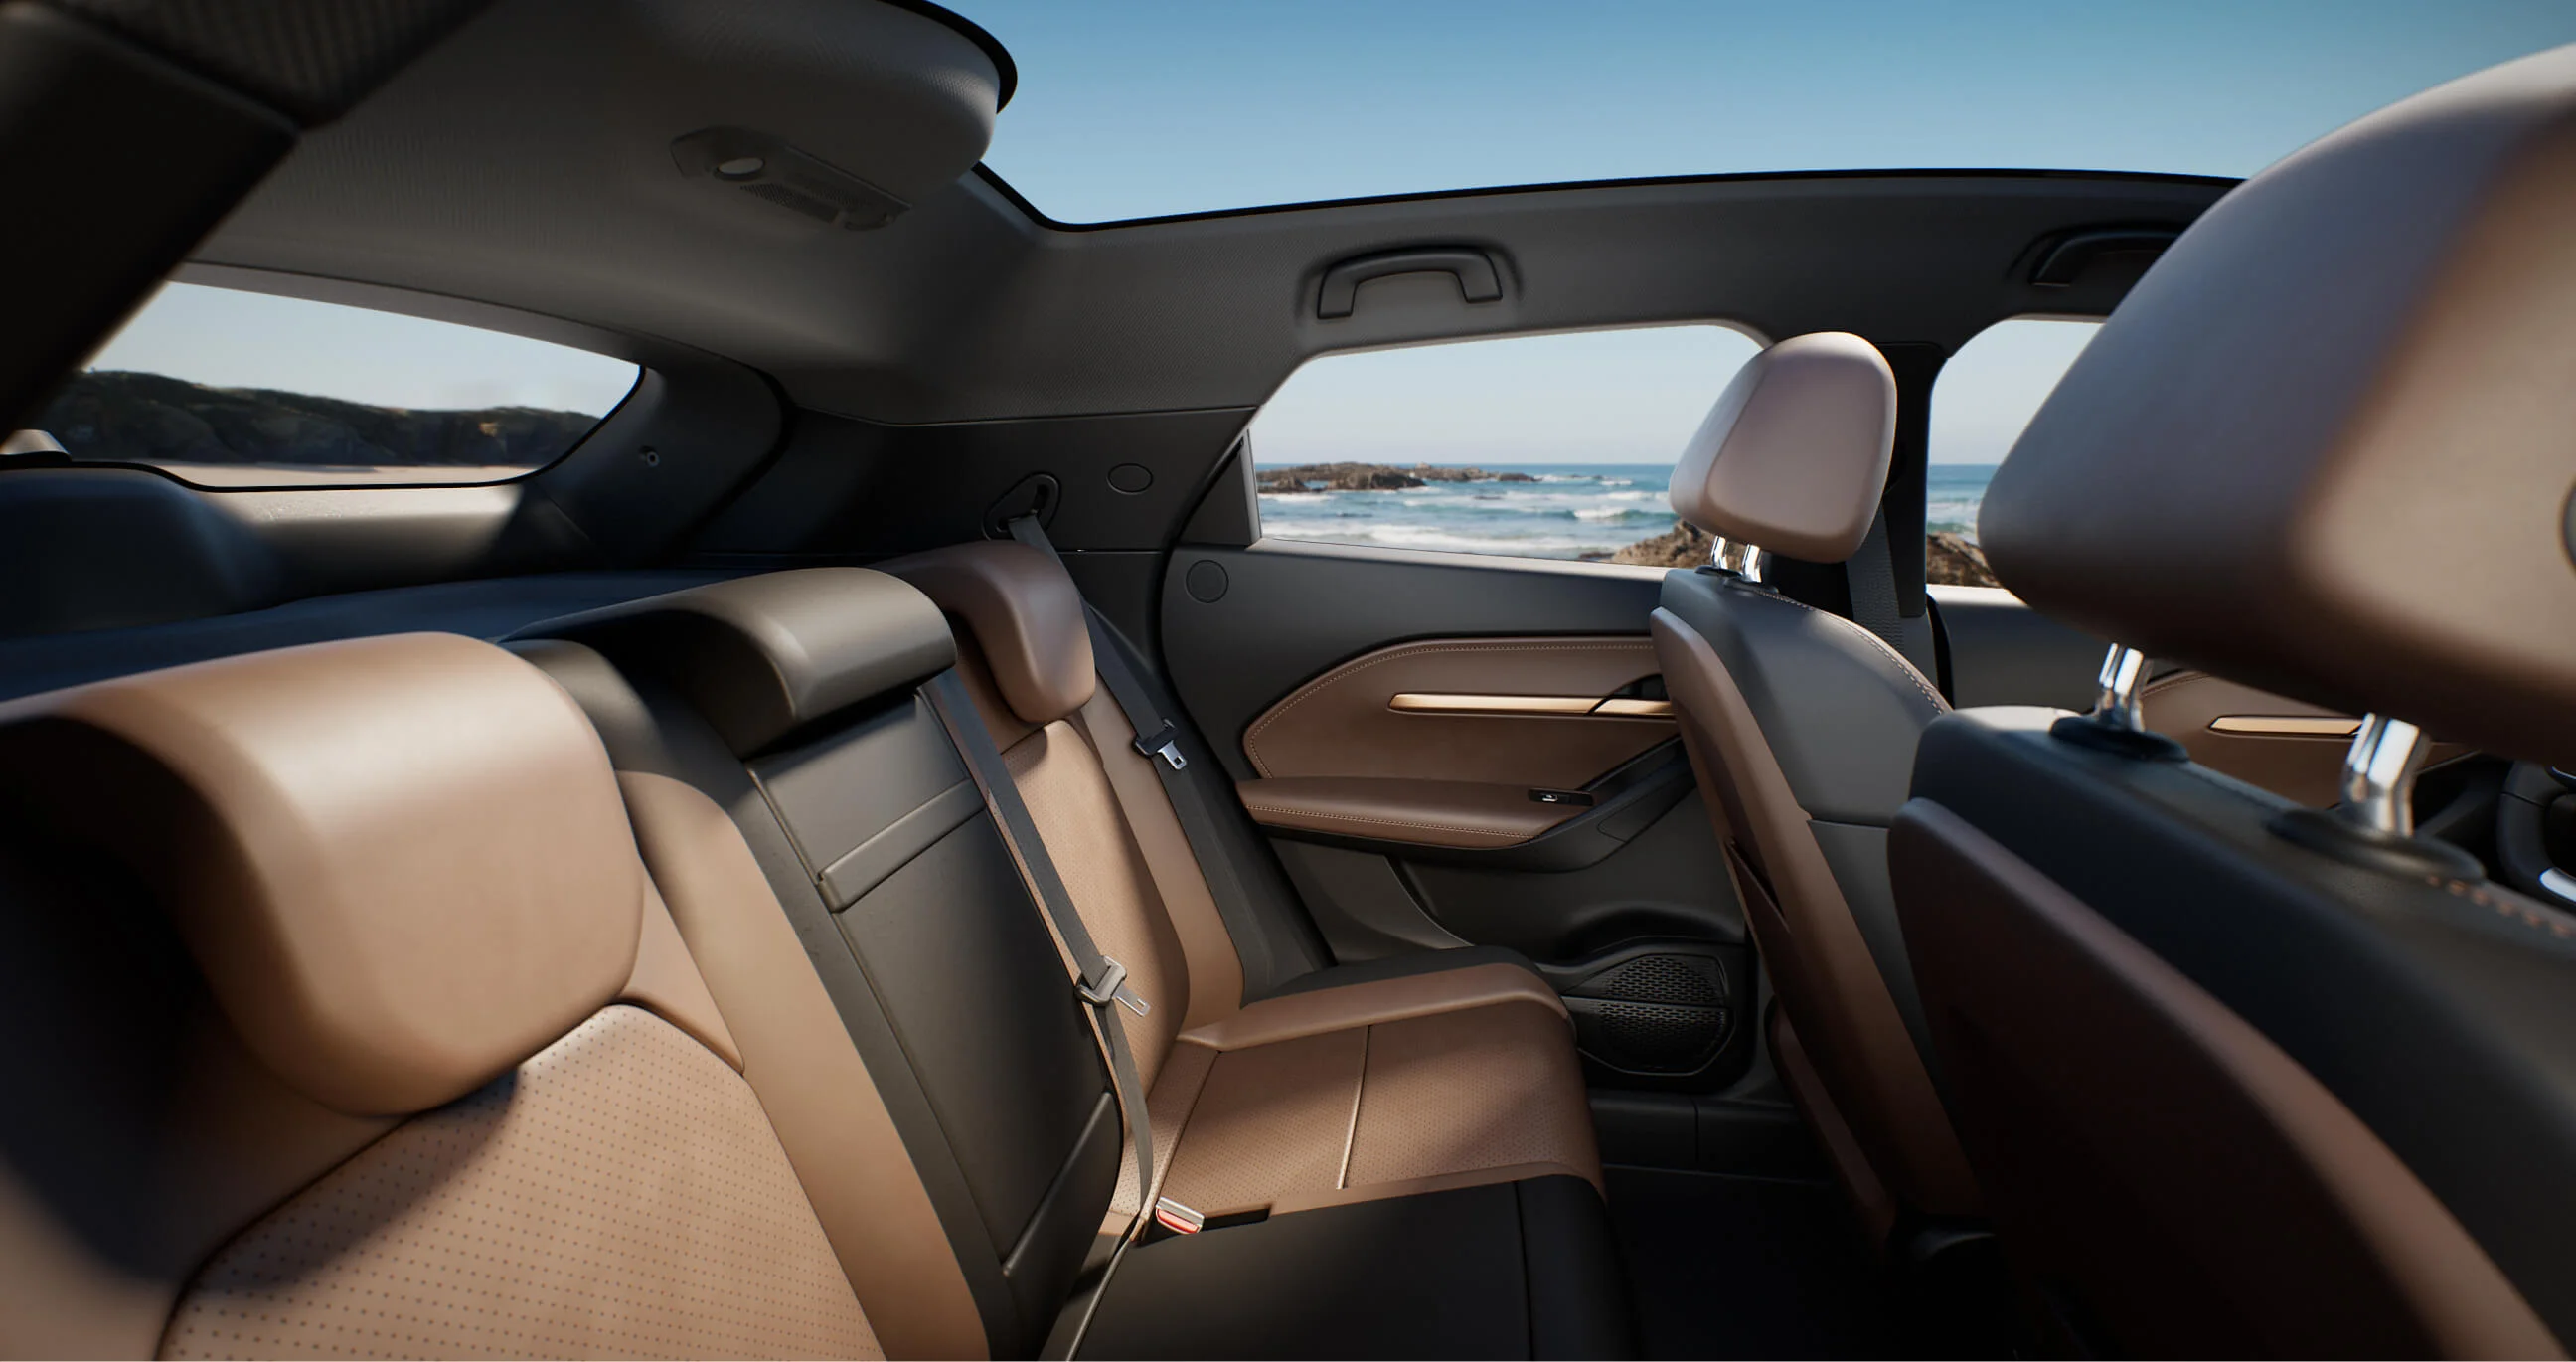 An inside look at the VF 6 with a spacious interior and brown and black vegan leather seating